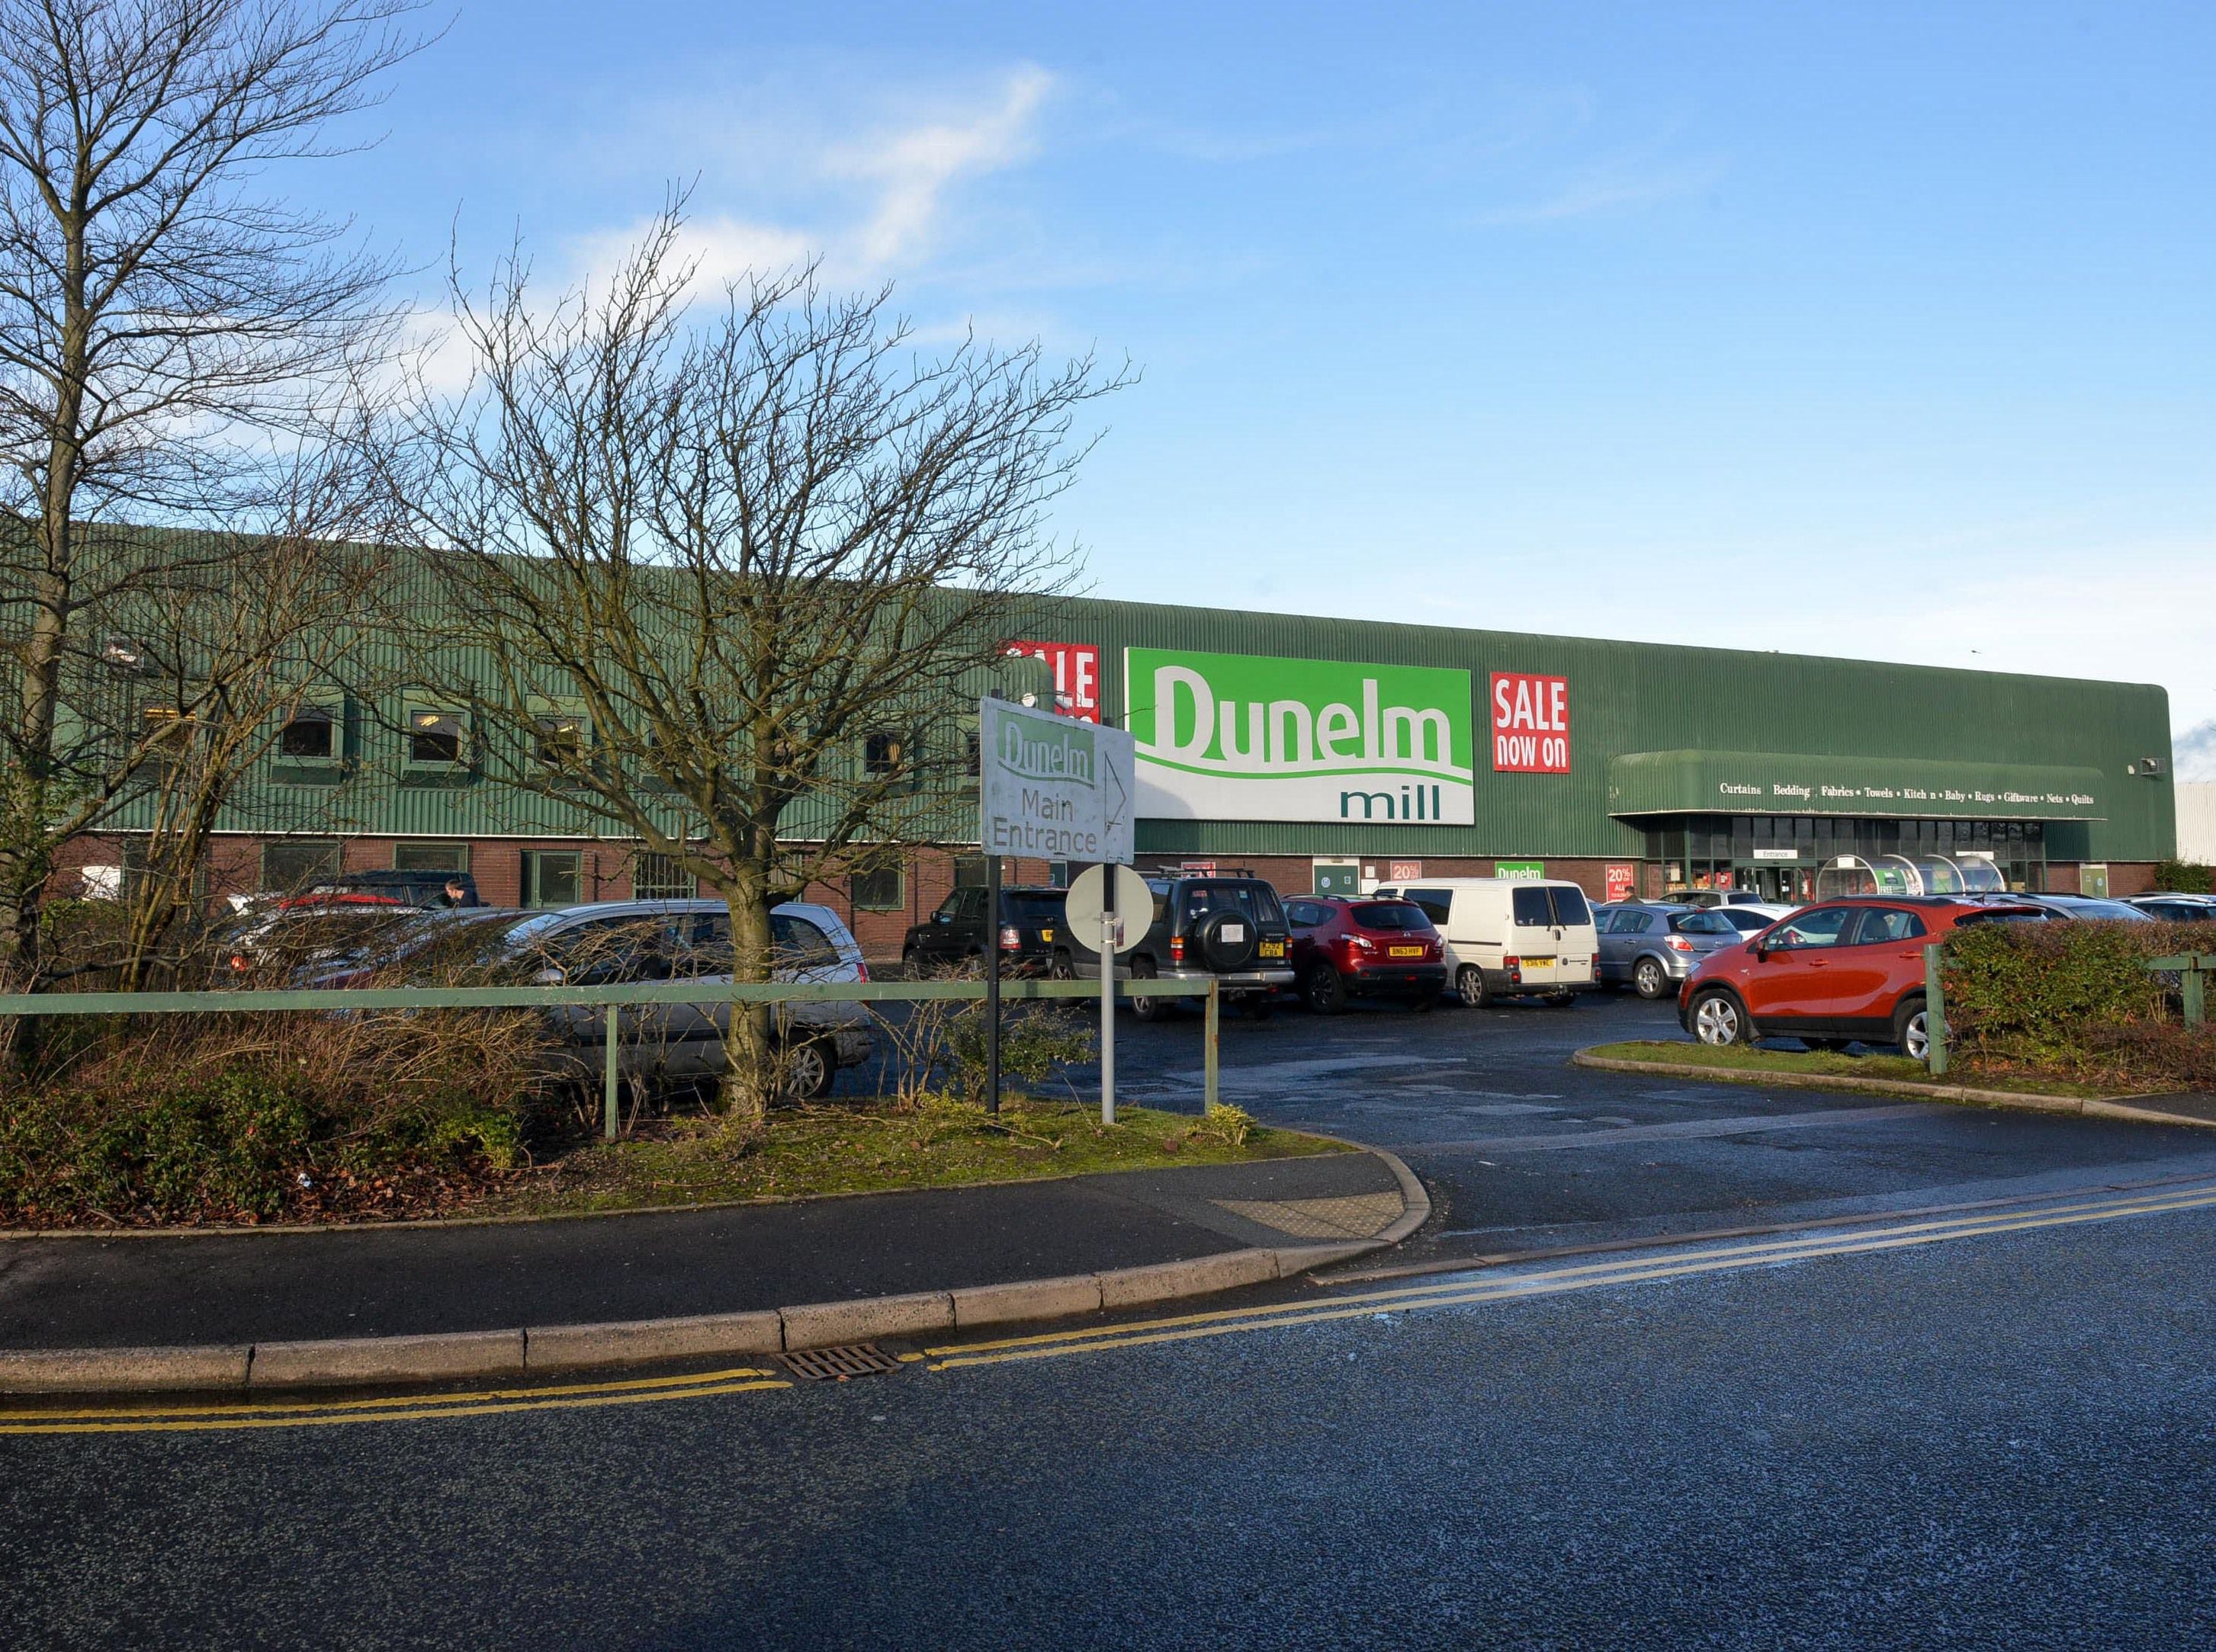 Sales are up for retailer Dunelm  